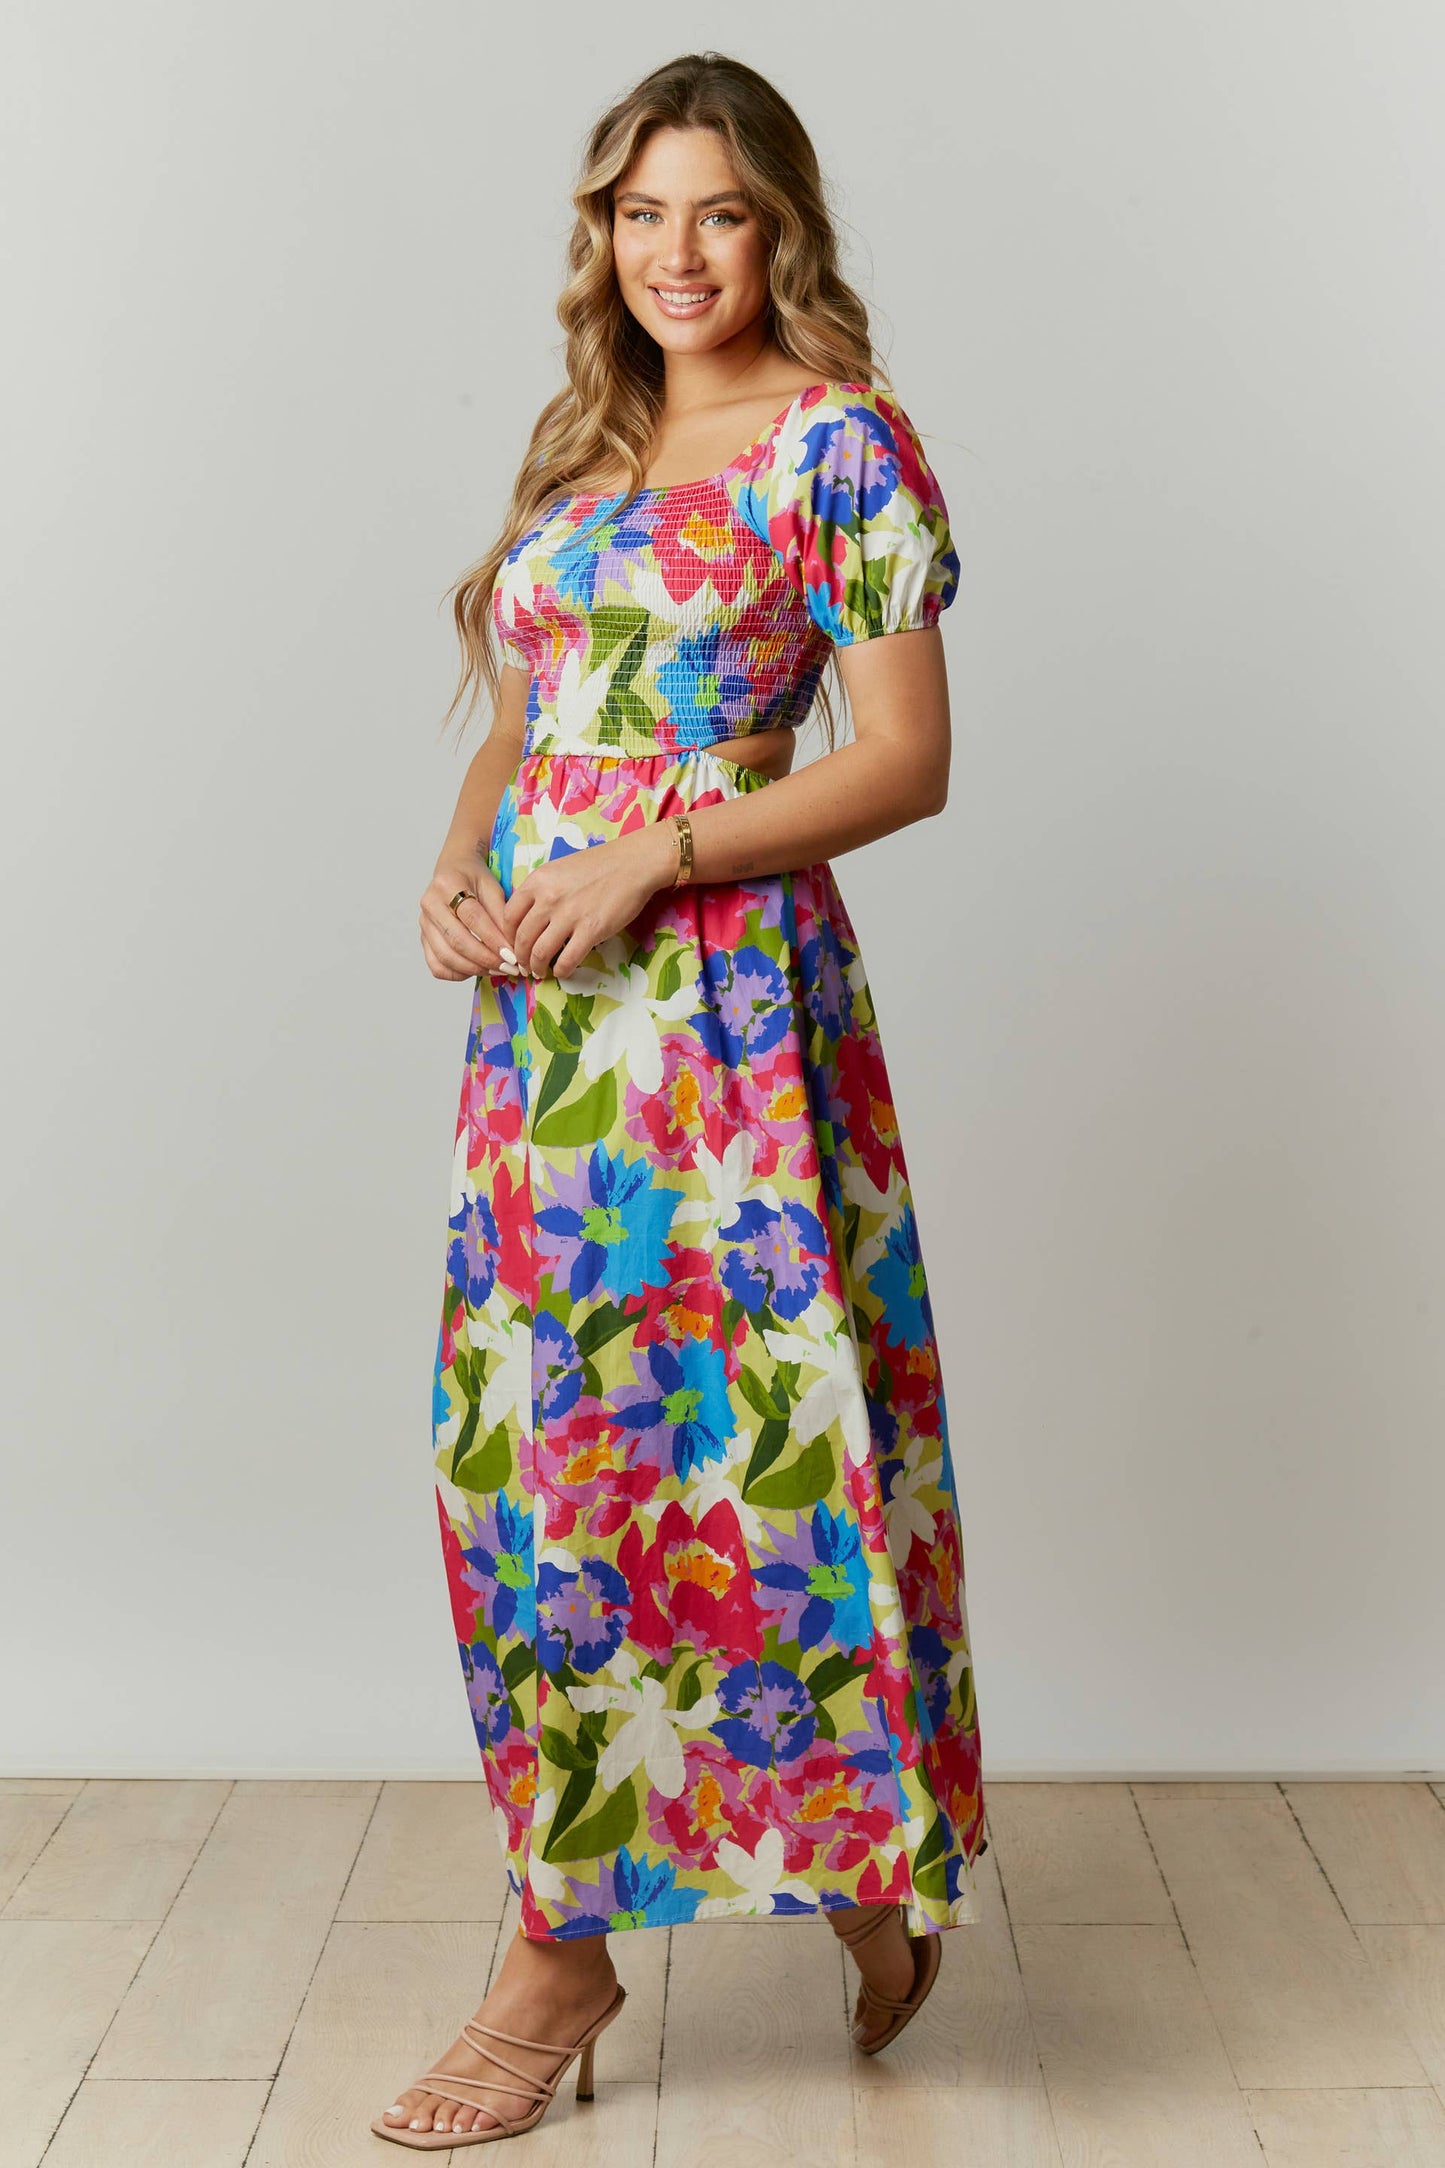 This abstract floral print maxi dress features a cut-out back with a square neckline and short puff sleeves.  The dress is composed with a smocked bodice.